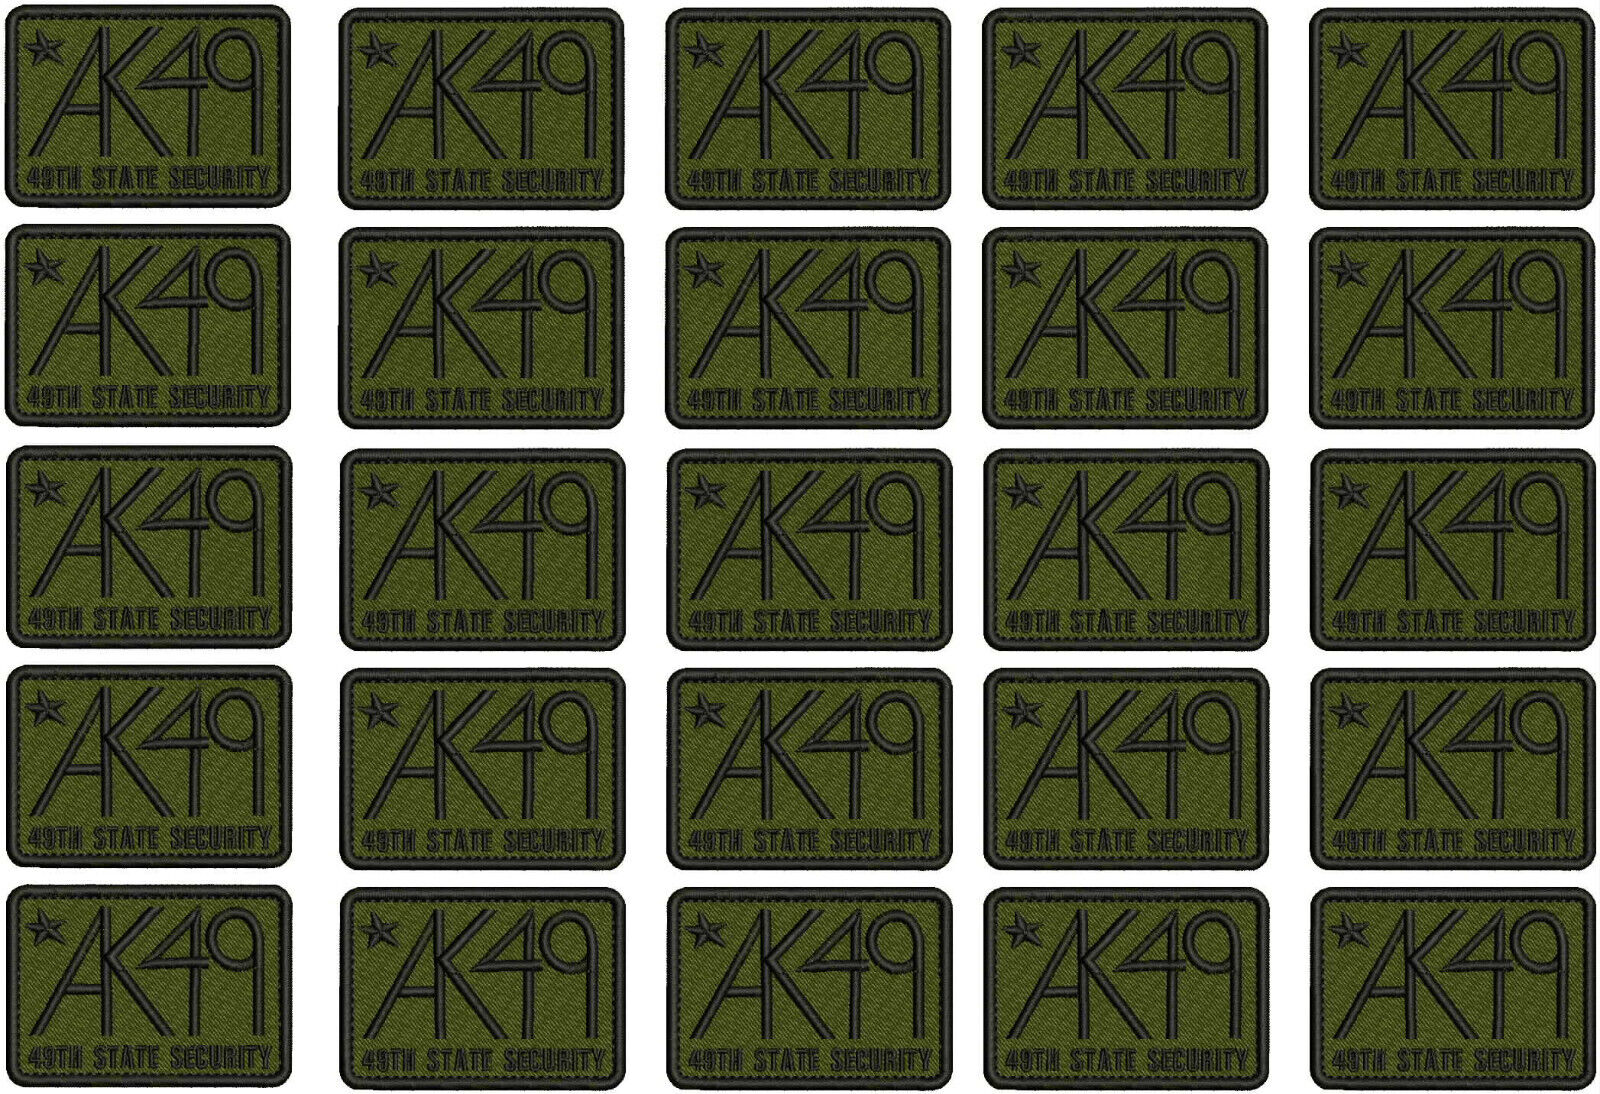 AK49 S SECURITY EMBROIDERY PATCH 3X2HOOK ON BACK OD GREEN/ BLACK